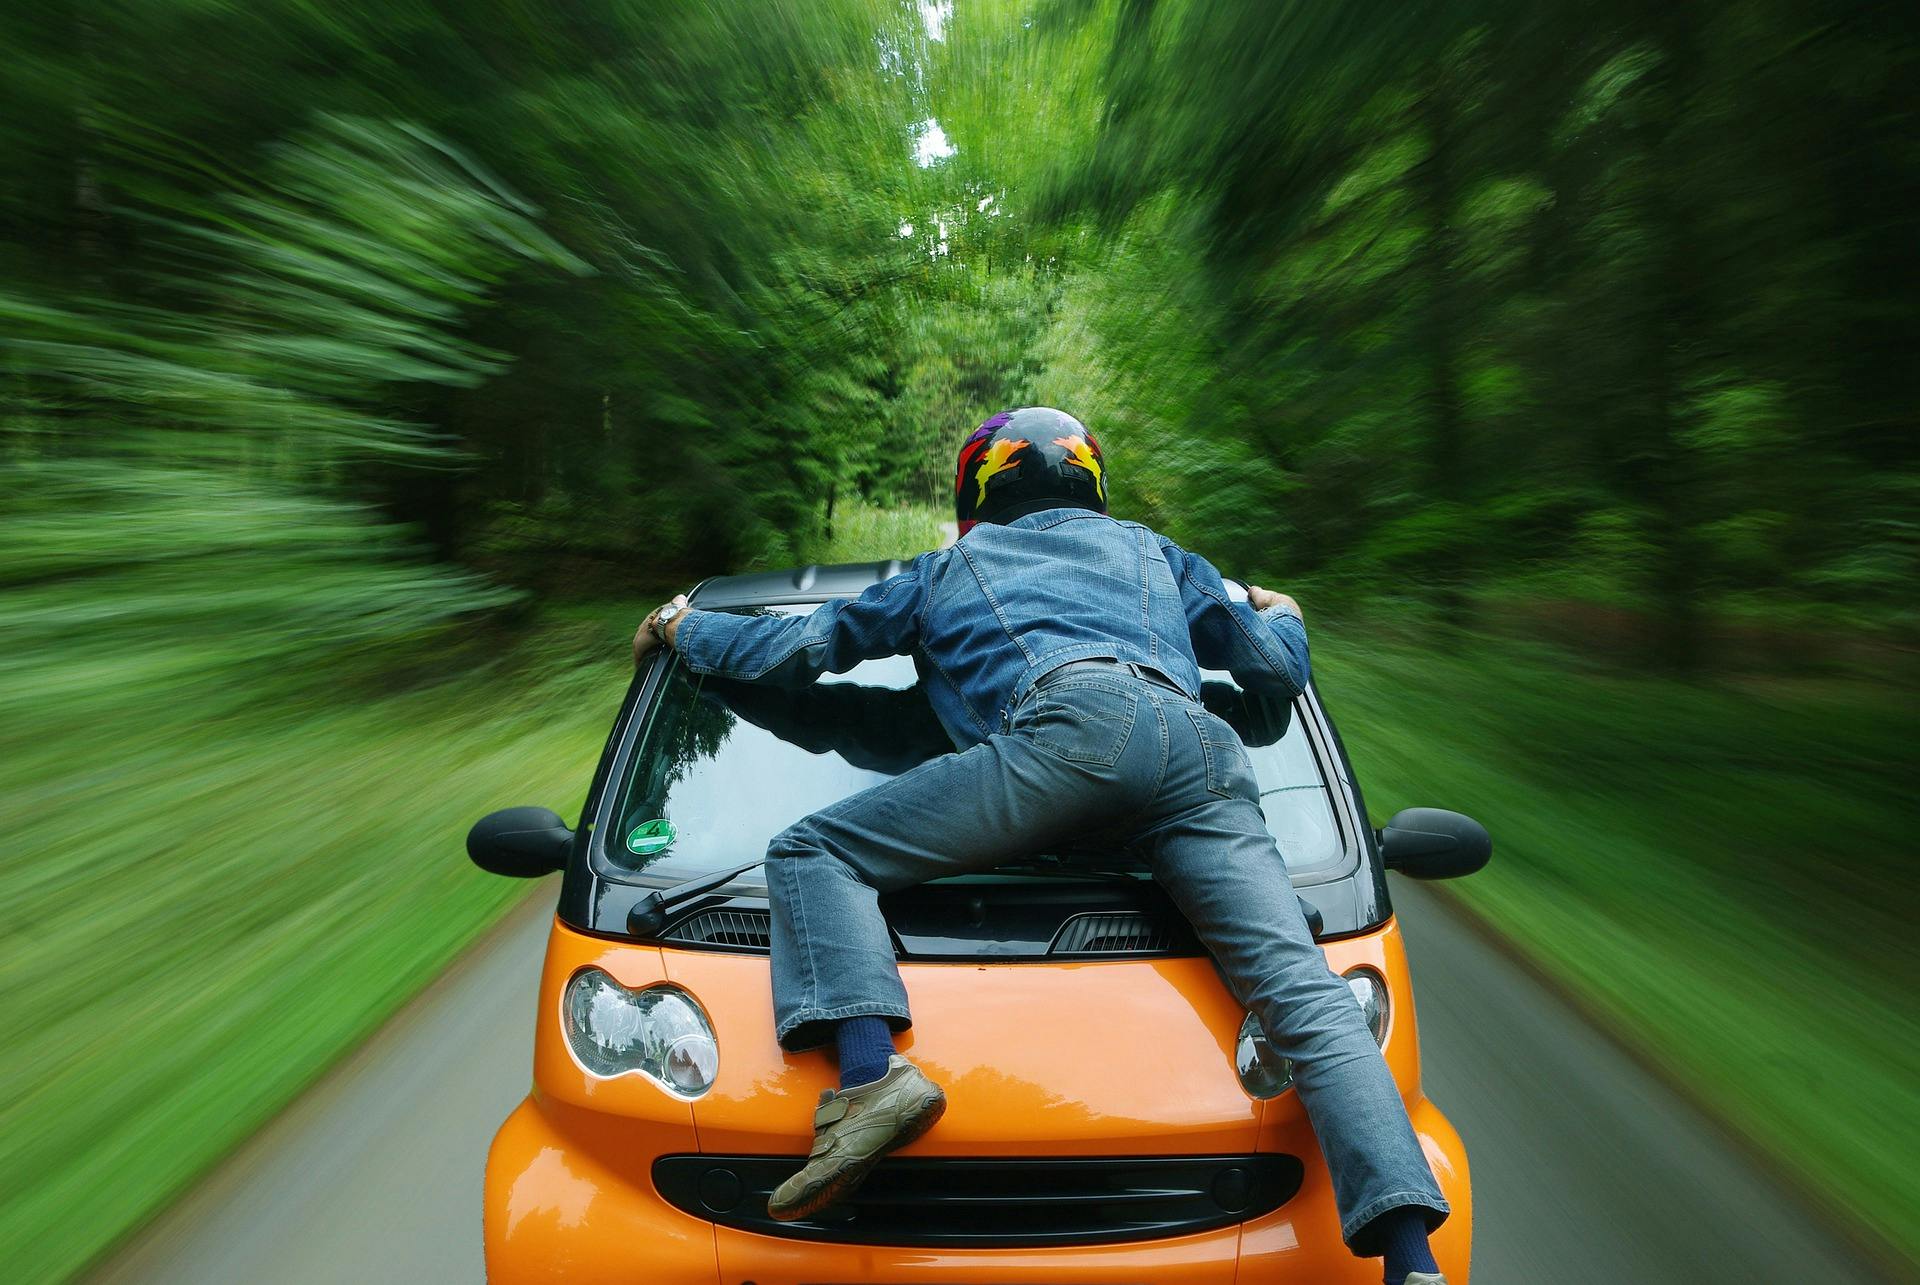 Man on a car's hood, holding on as it speeds through a forest 